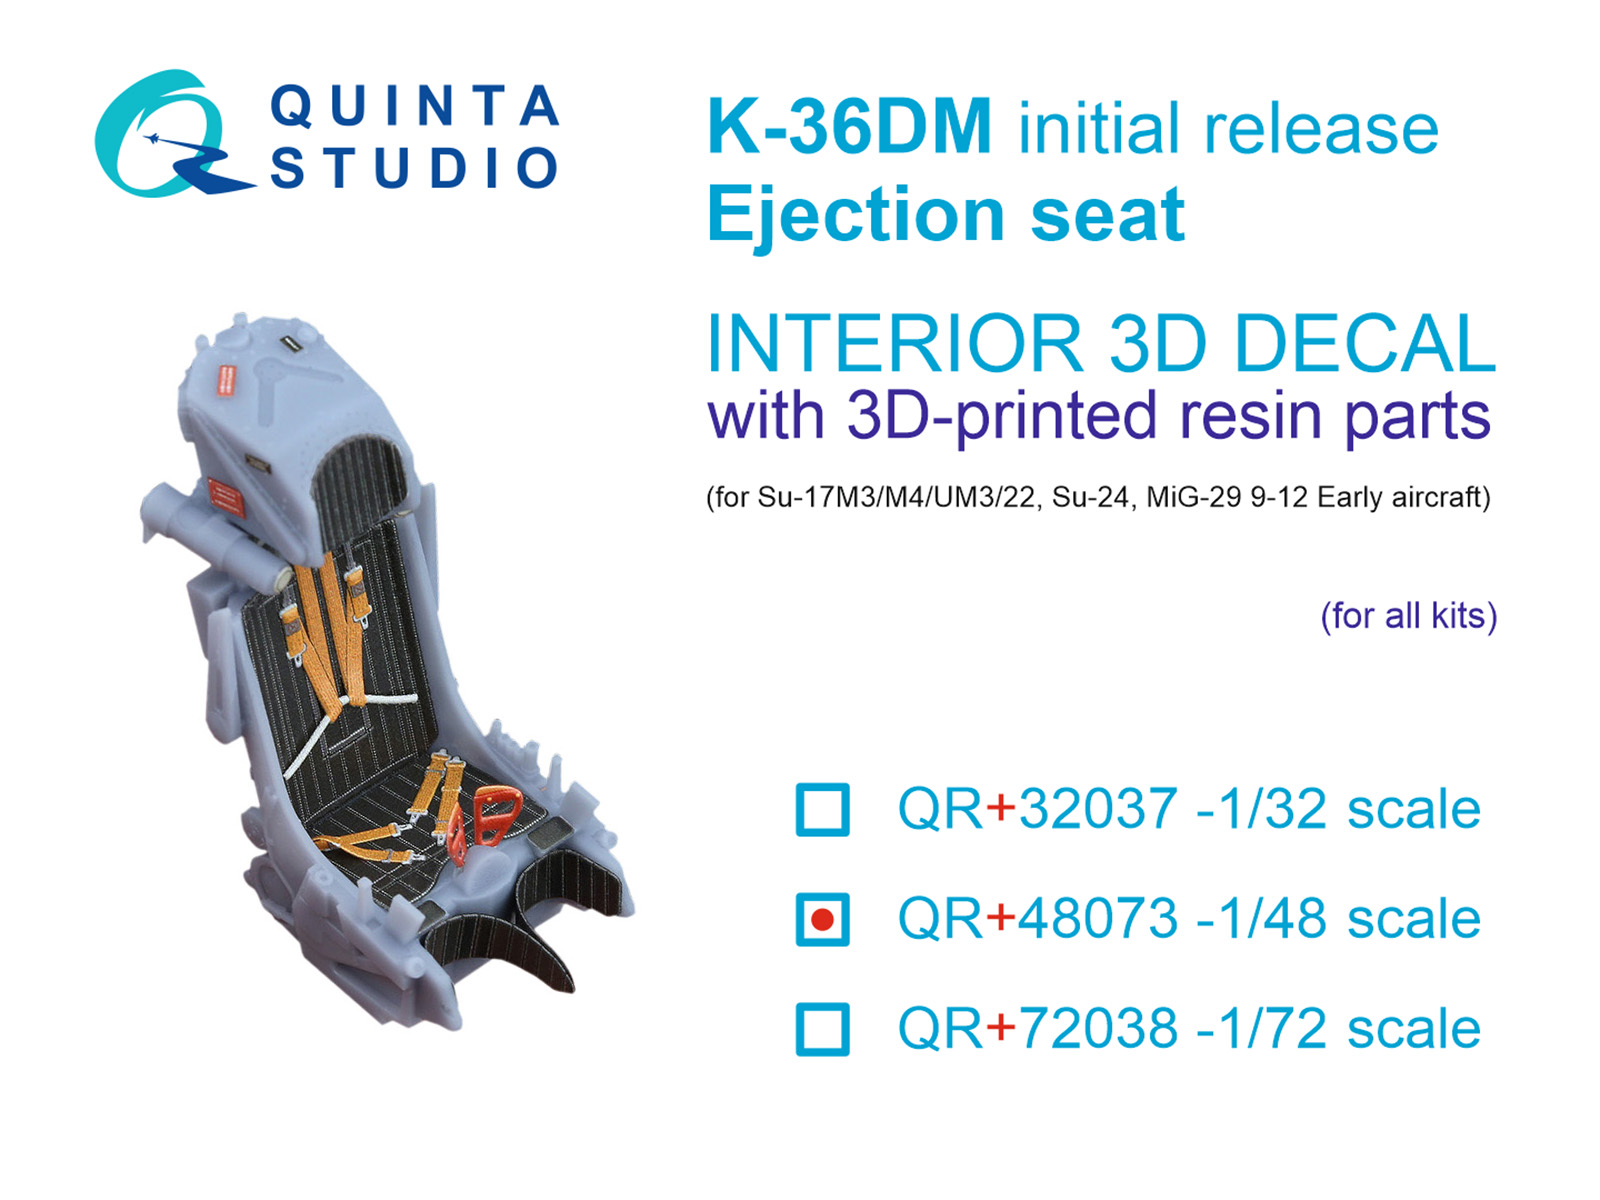 K-36DM (initial release) ejection seat (for Su-17M3/M4/UM3/22, Su-24, MiG-29 9-12 Early aircraft) (All kits)